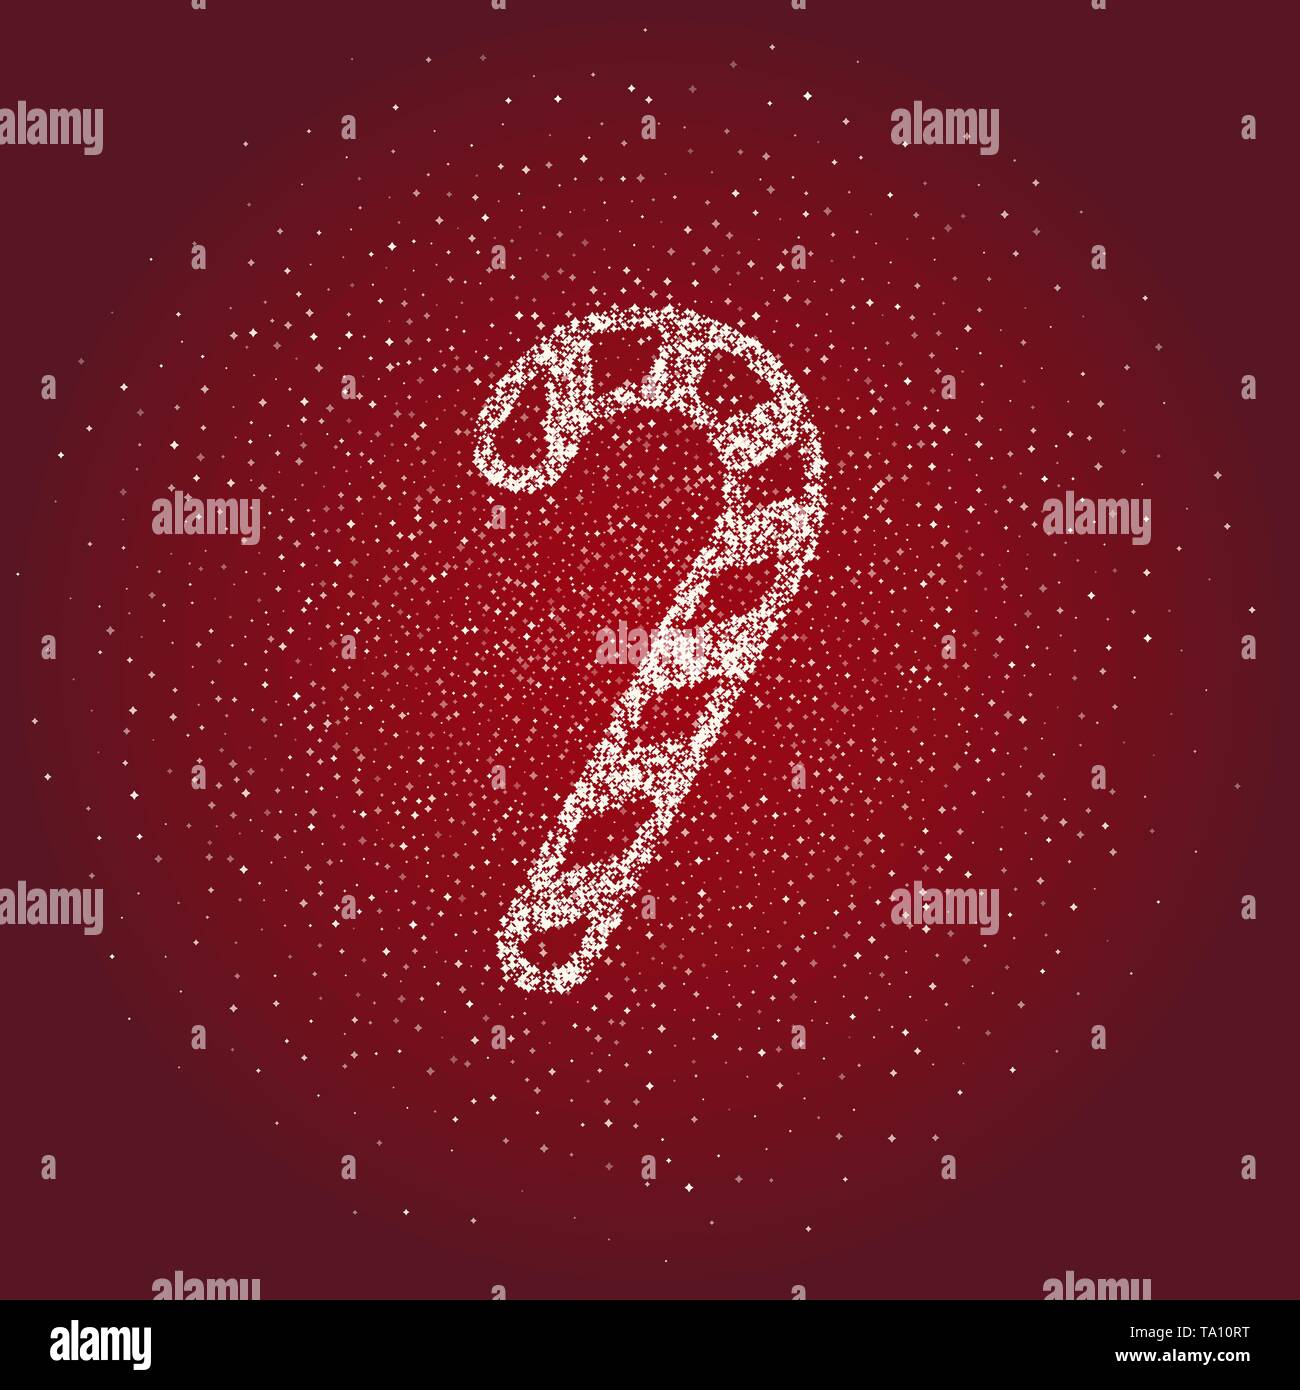 Candy cane icon. New year and xmas, christmas, winter symbol. Flat design. Stock - Vector illustration. Stock Vector